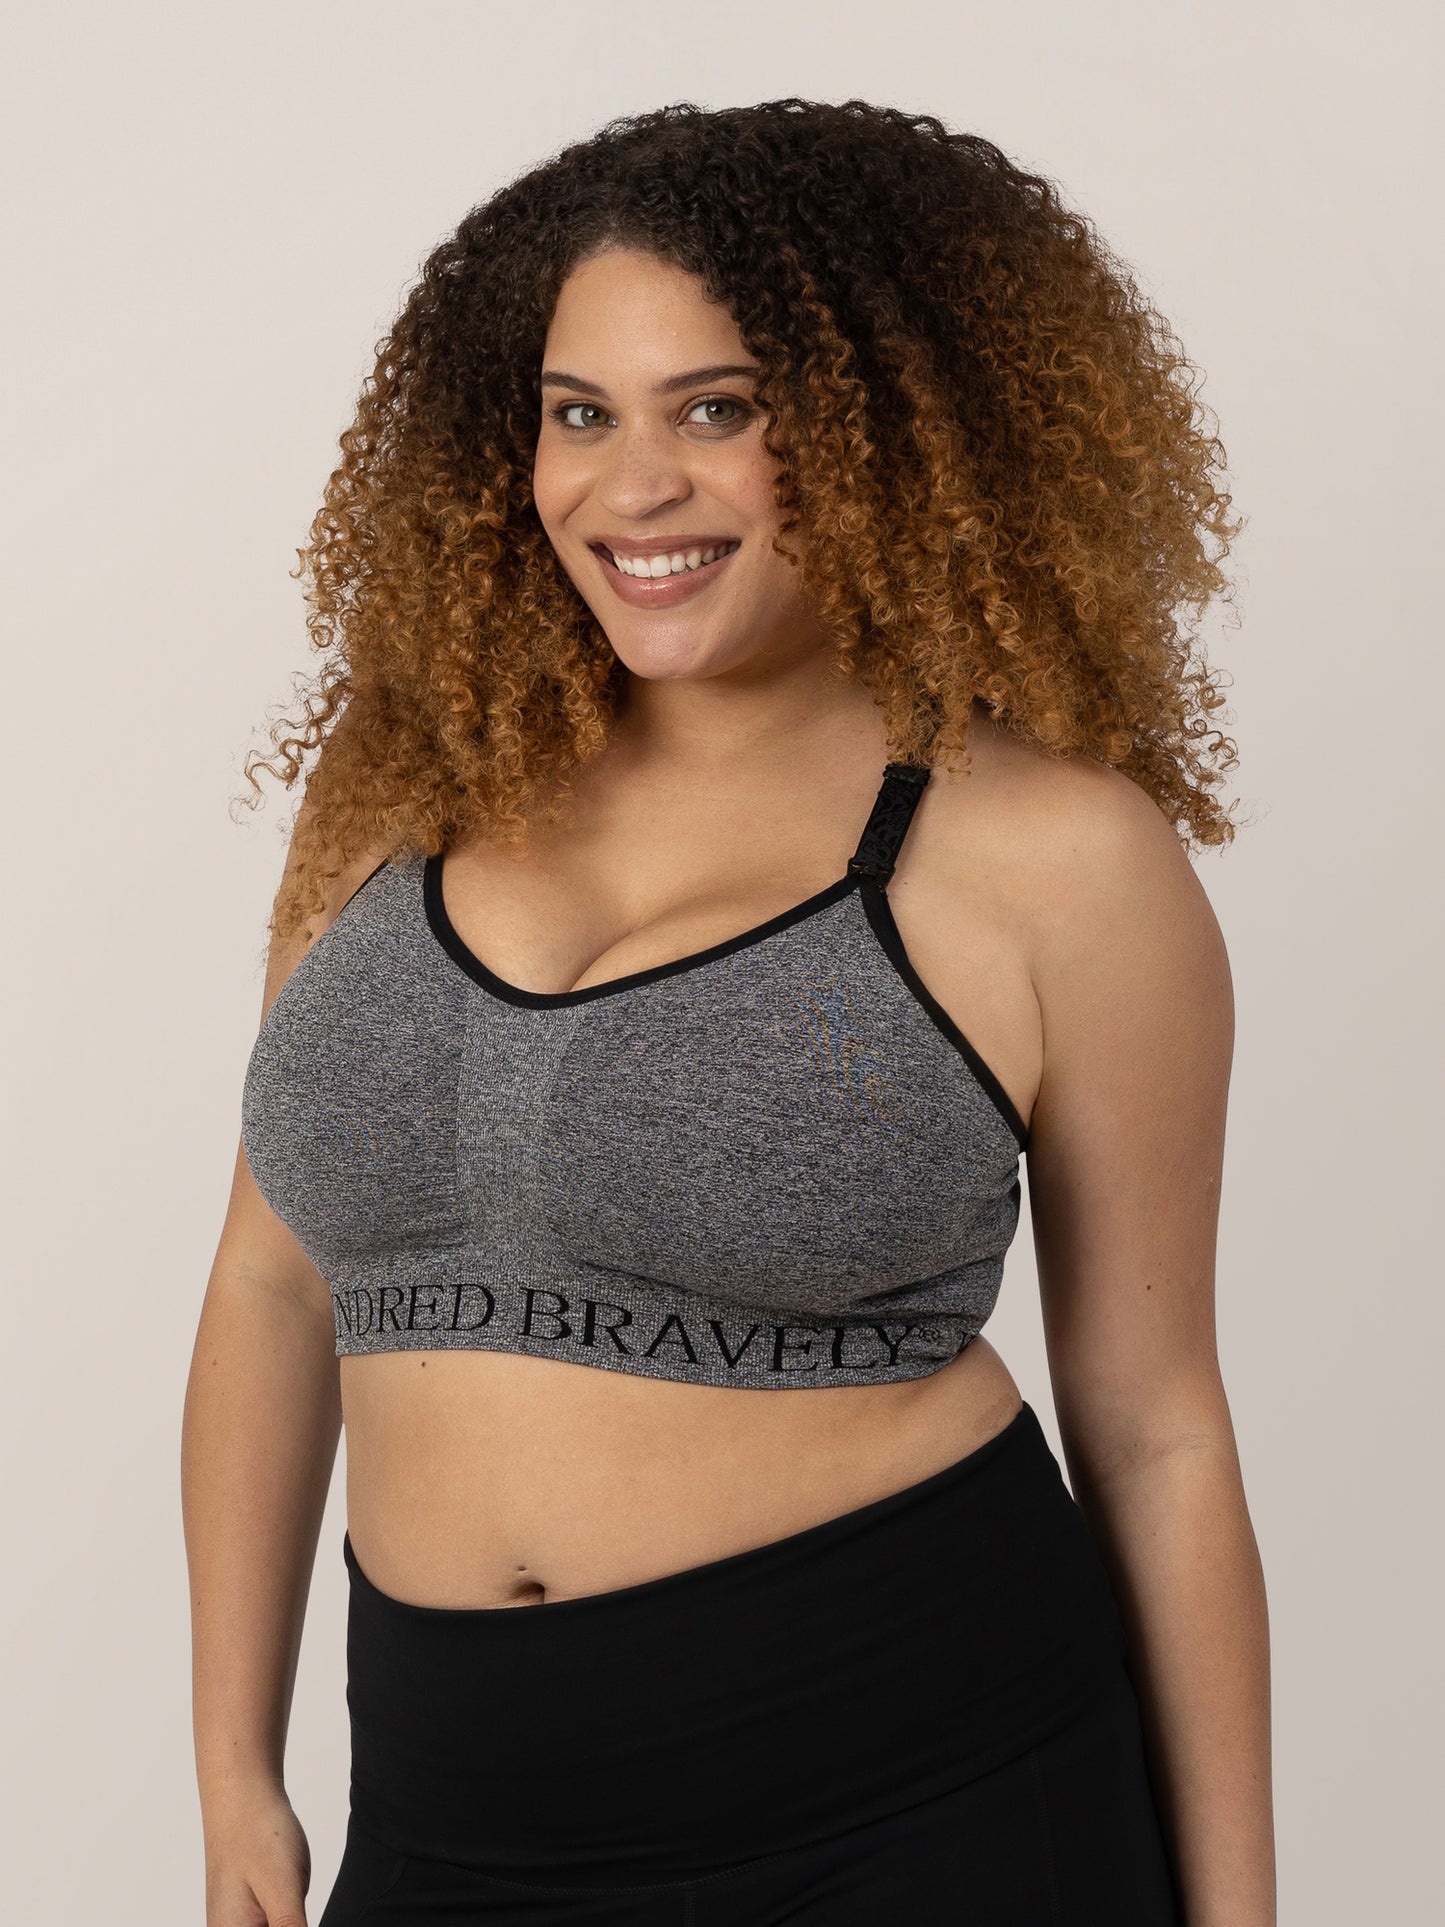 24 Best Sports Bras for Large Breasts - Supportive Sports Bras